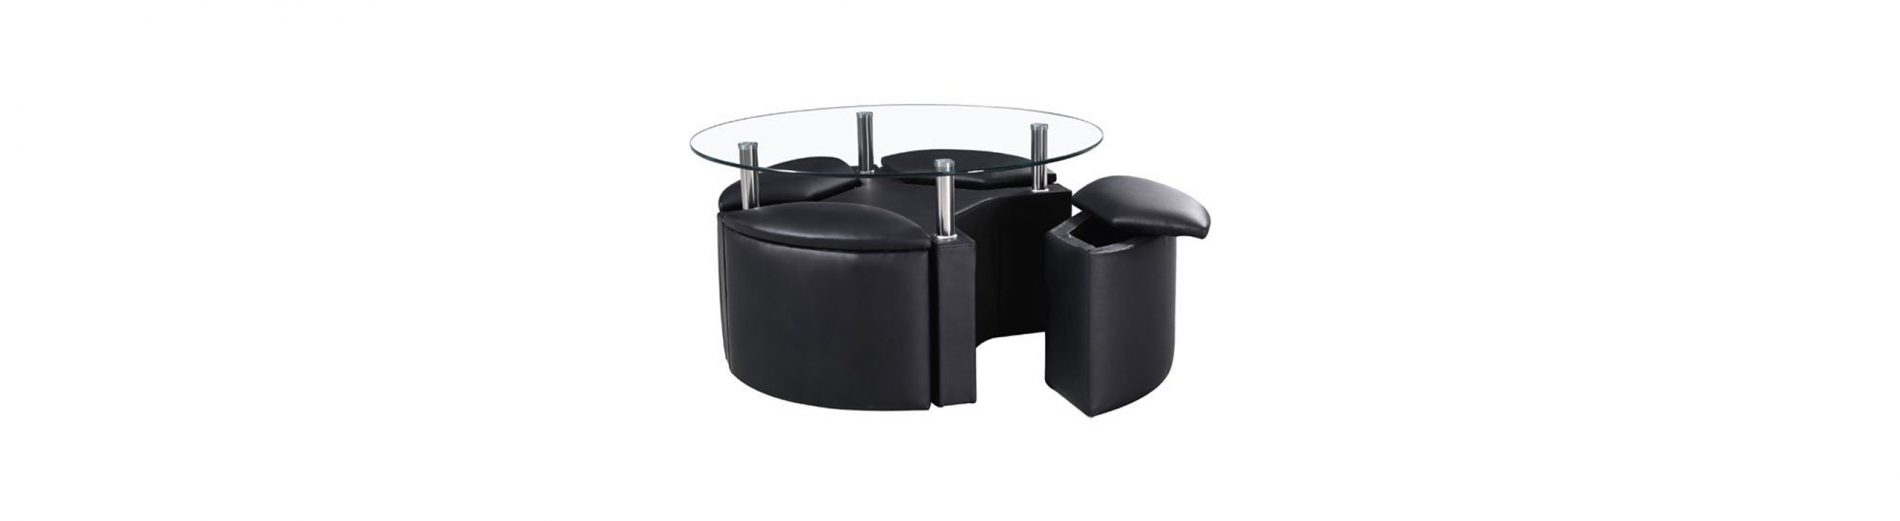 Different Assemblies Of A Round Coffee Table With Storage And The Perks They Offer